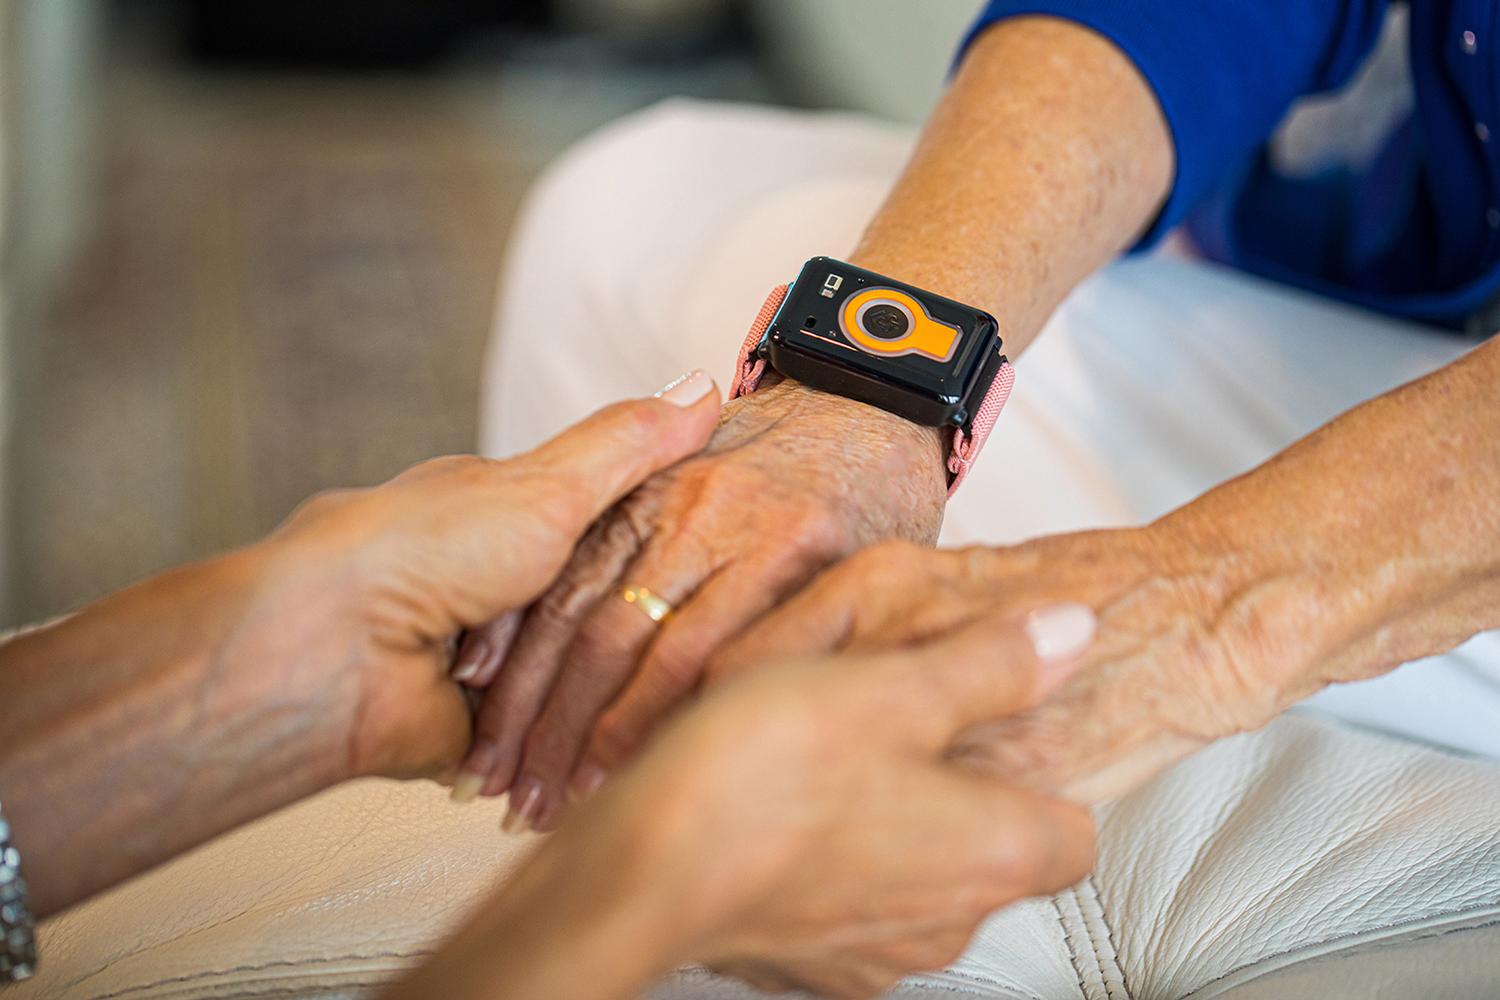 The wearable allows families of seniors to know when they are skipping meals, aren't sleeping well, are less active or if things are different than usual / CarePredict